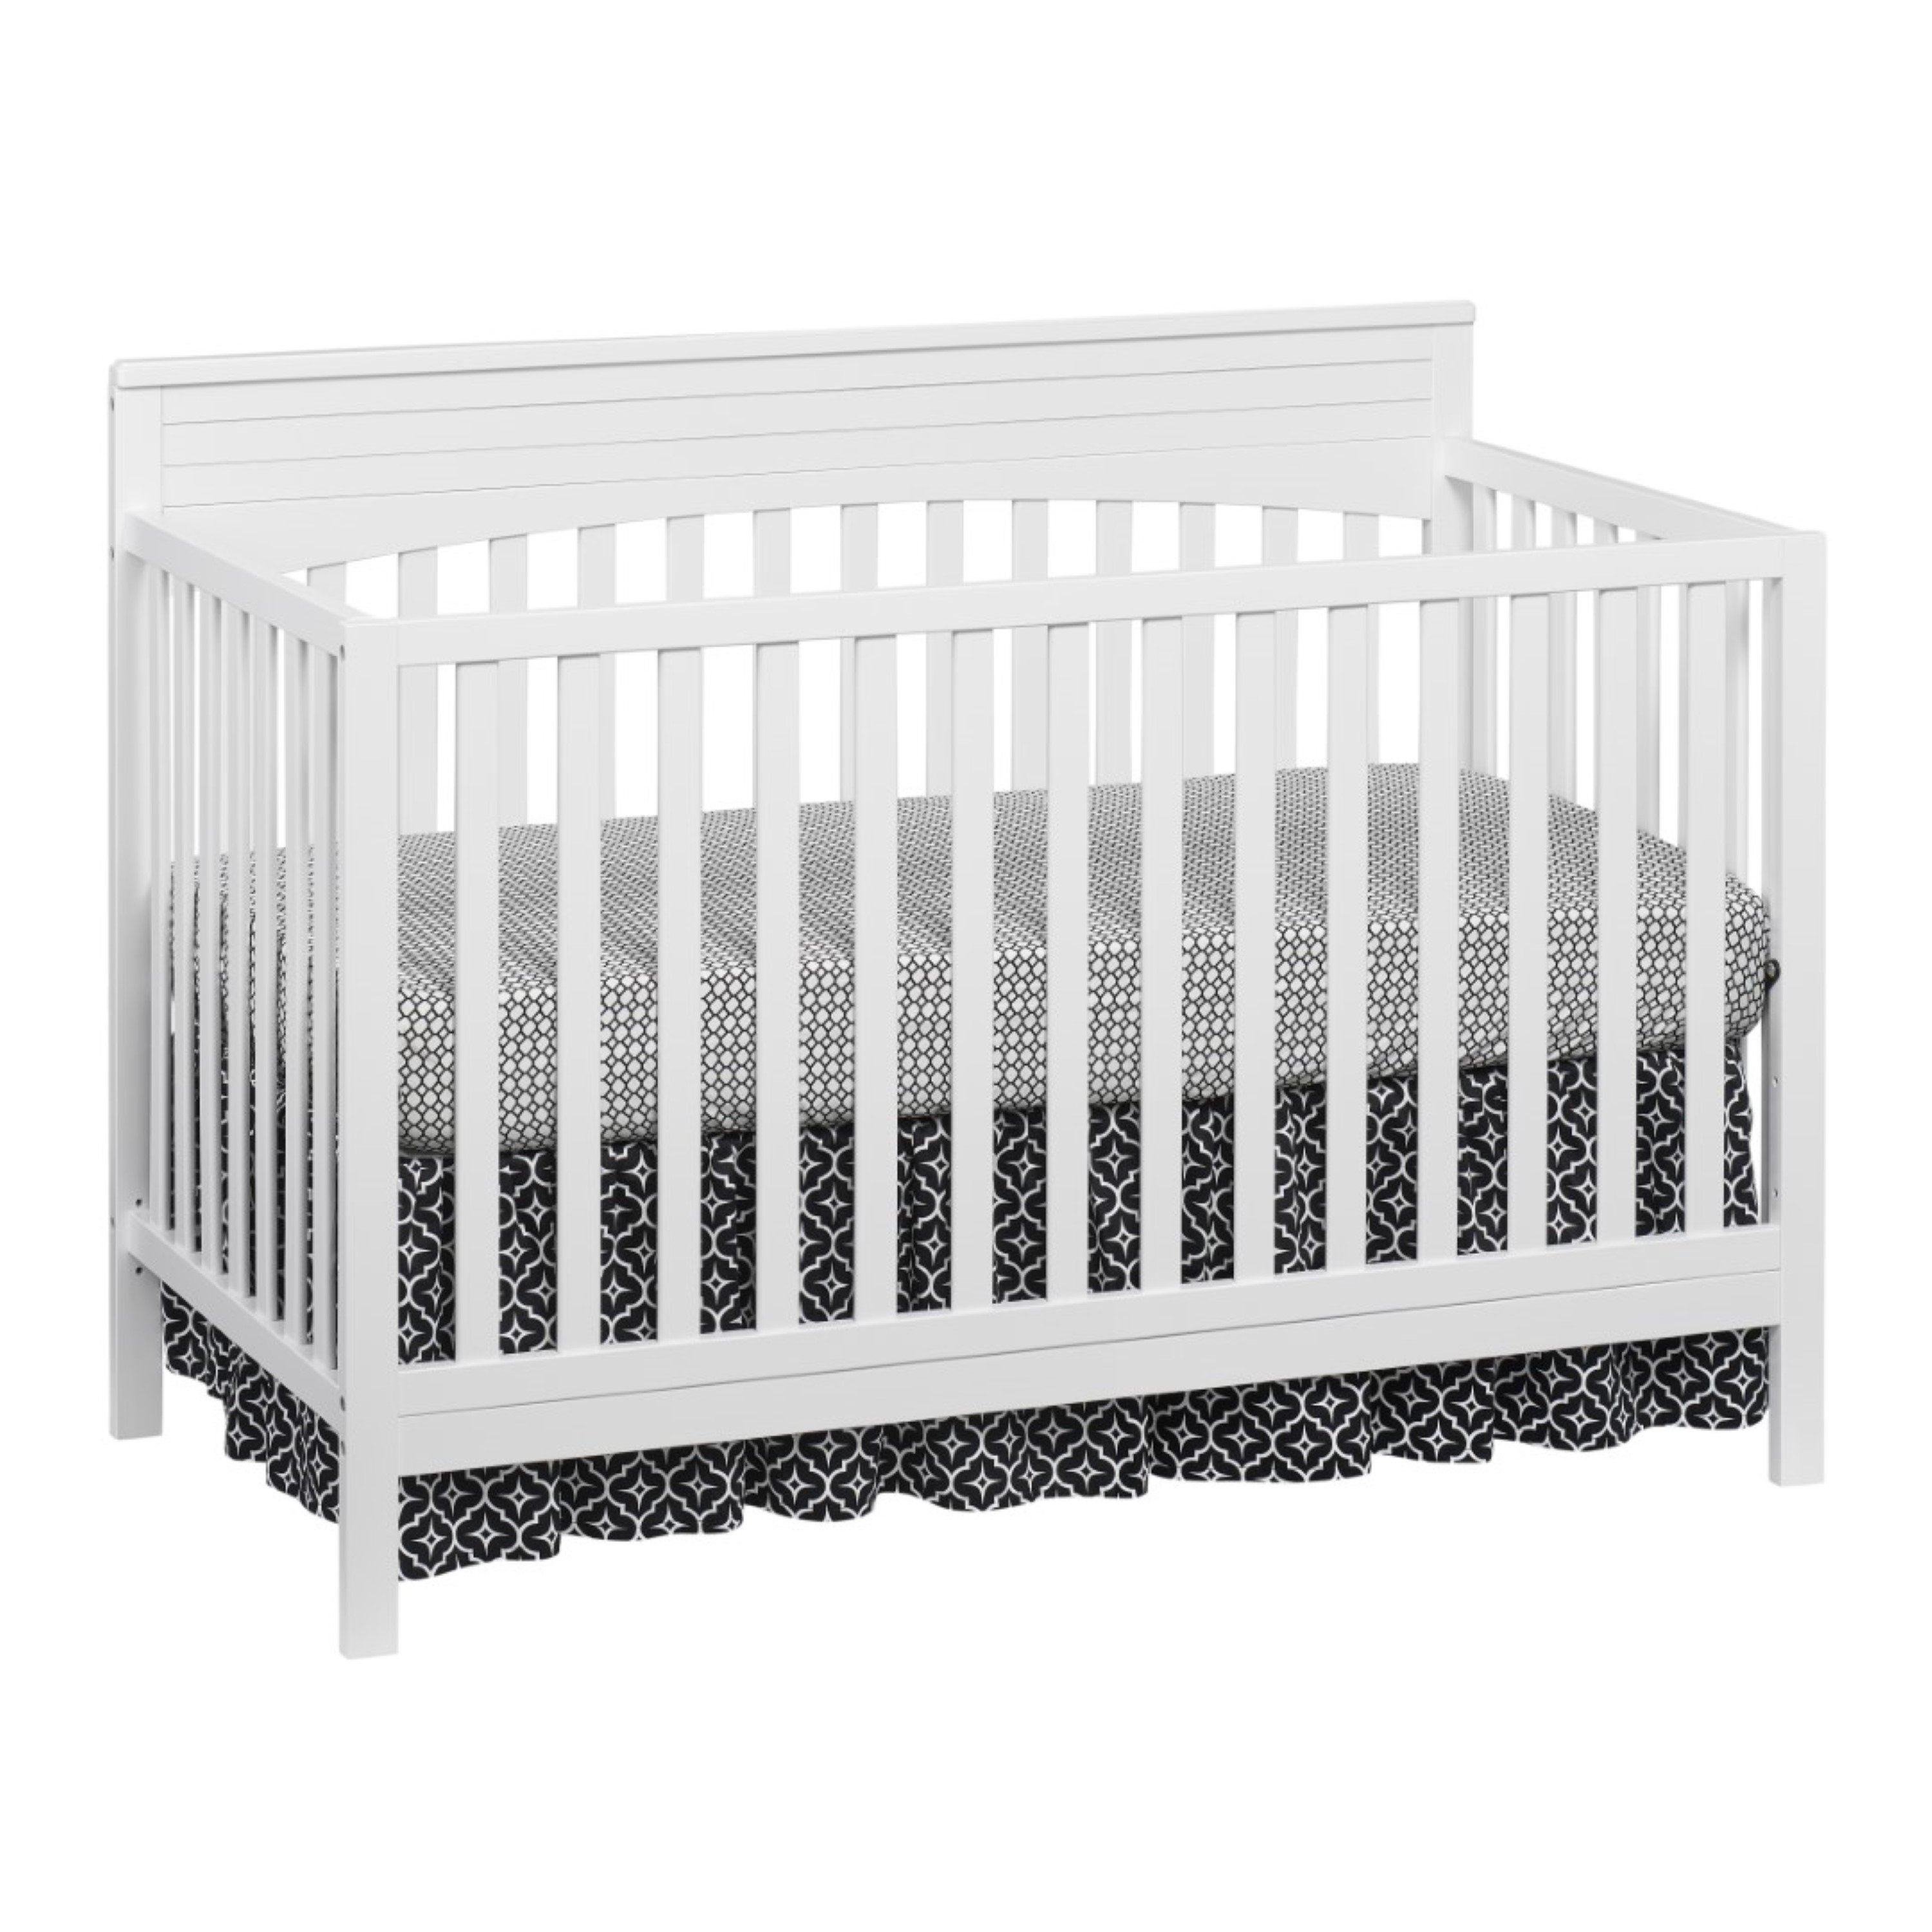 Oxford Baby Harper 4-in-1 Convertible Crib, Snow White, GREENGUARD Gold Certified, Wooden Crib - image 5 of 11